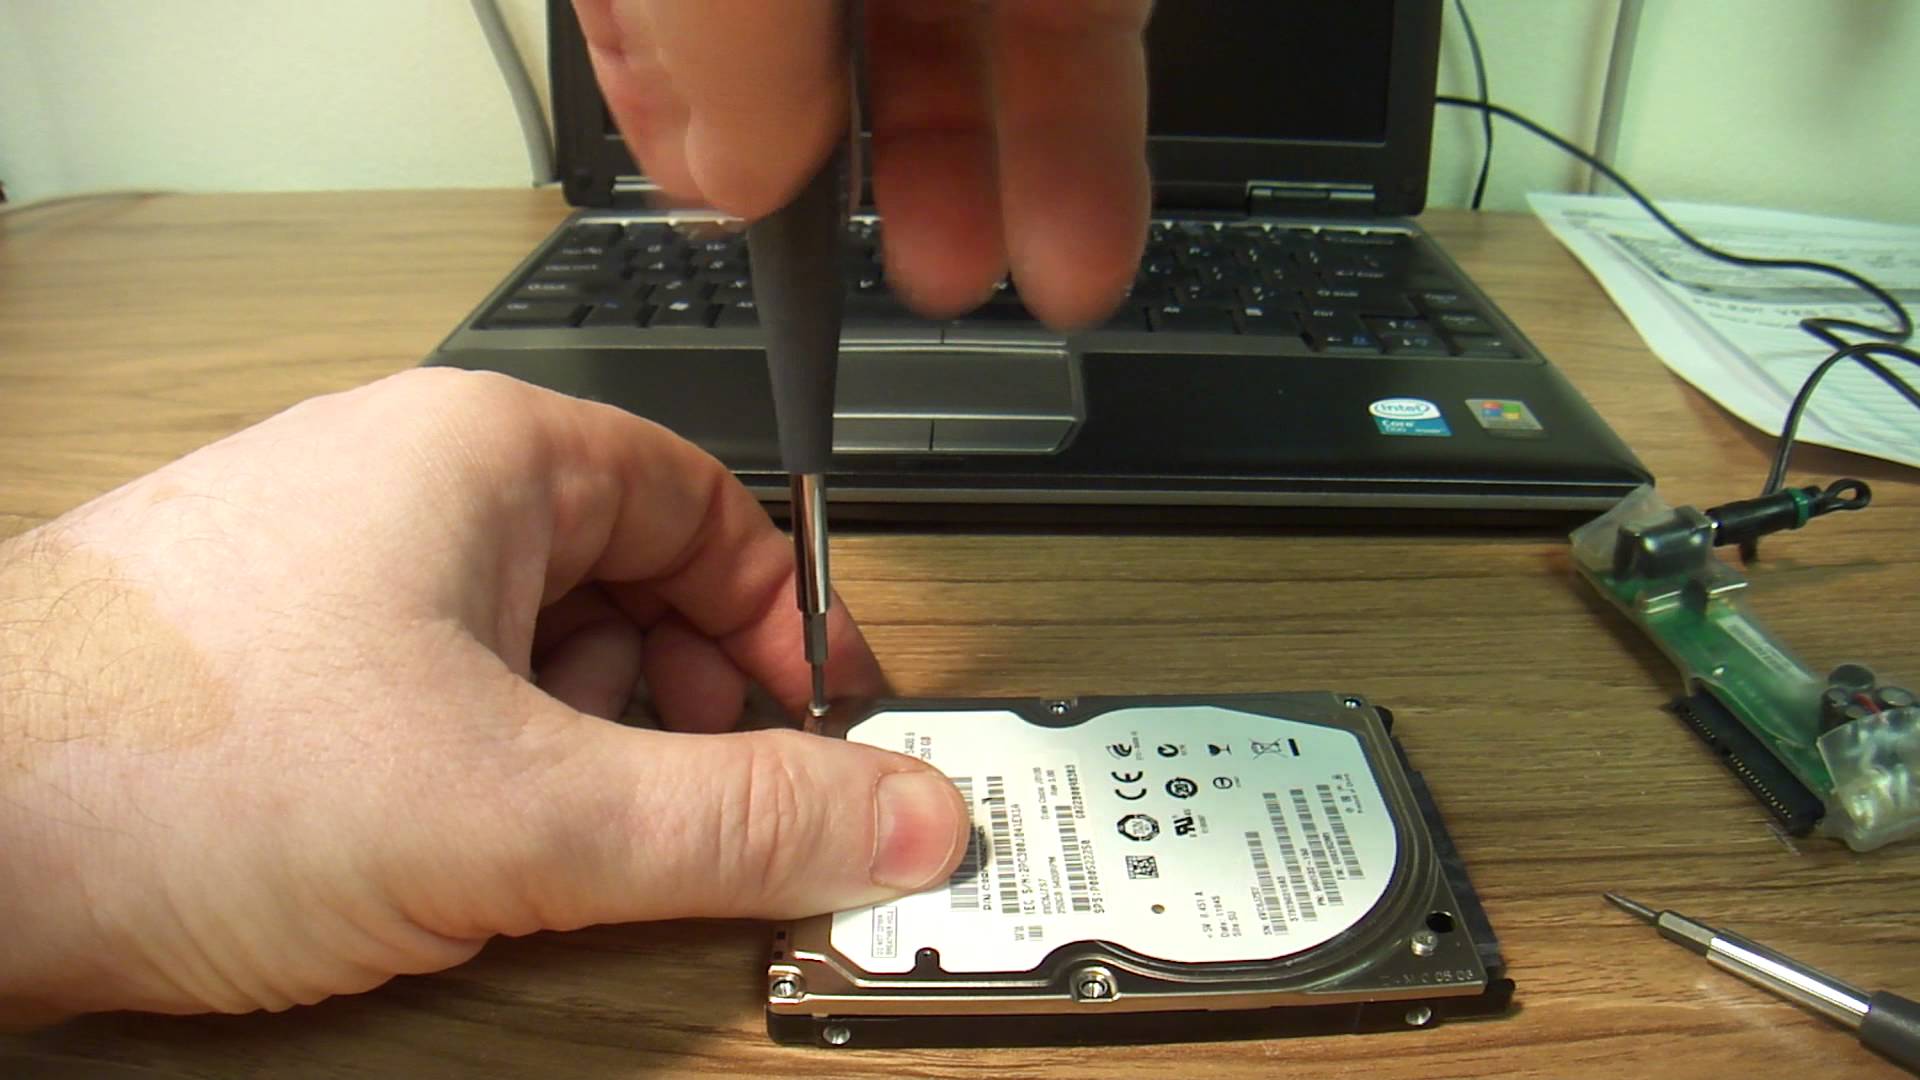 Acquire an easy solution to solve hard drive data recovery problem